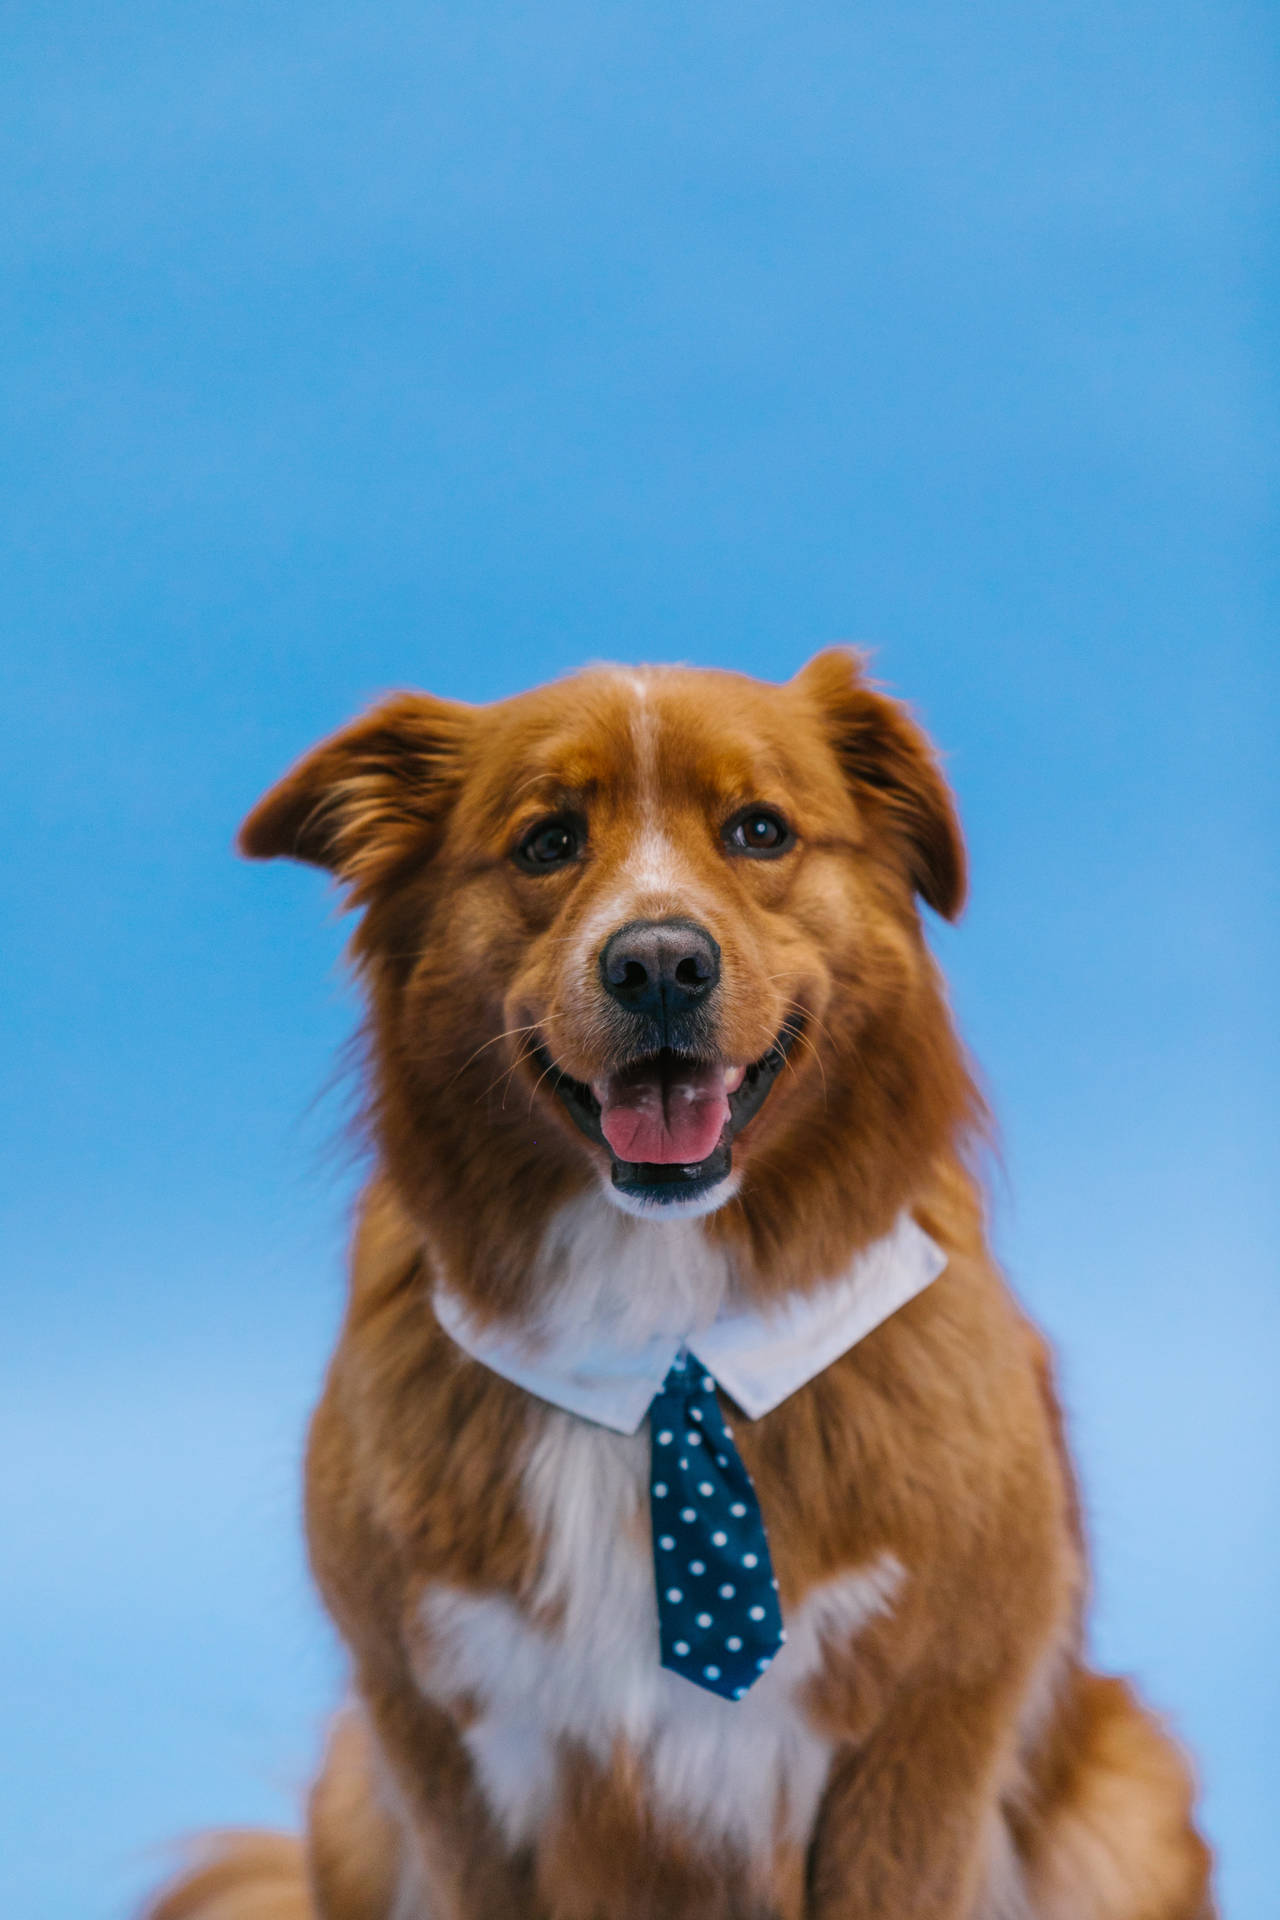 Cute Dog With Blue Tie Wallpaper